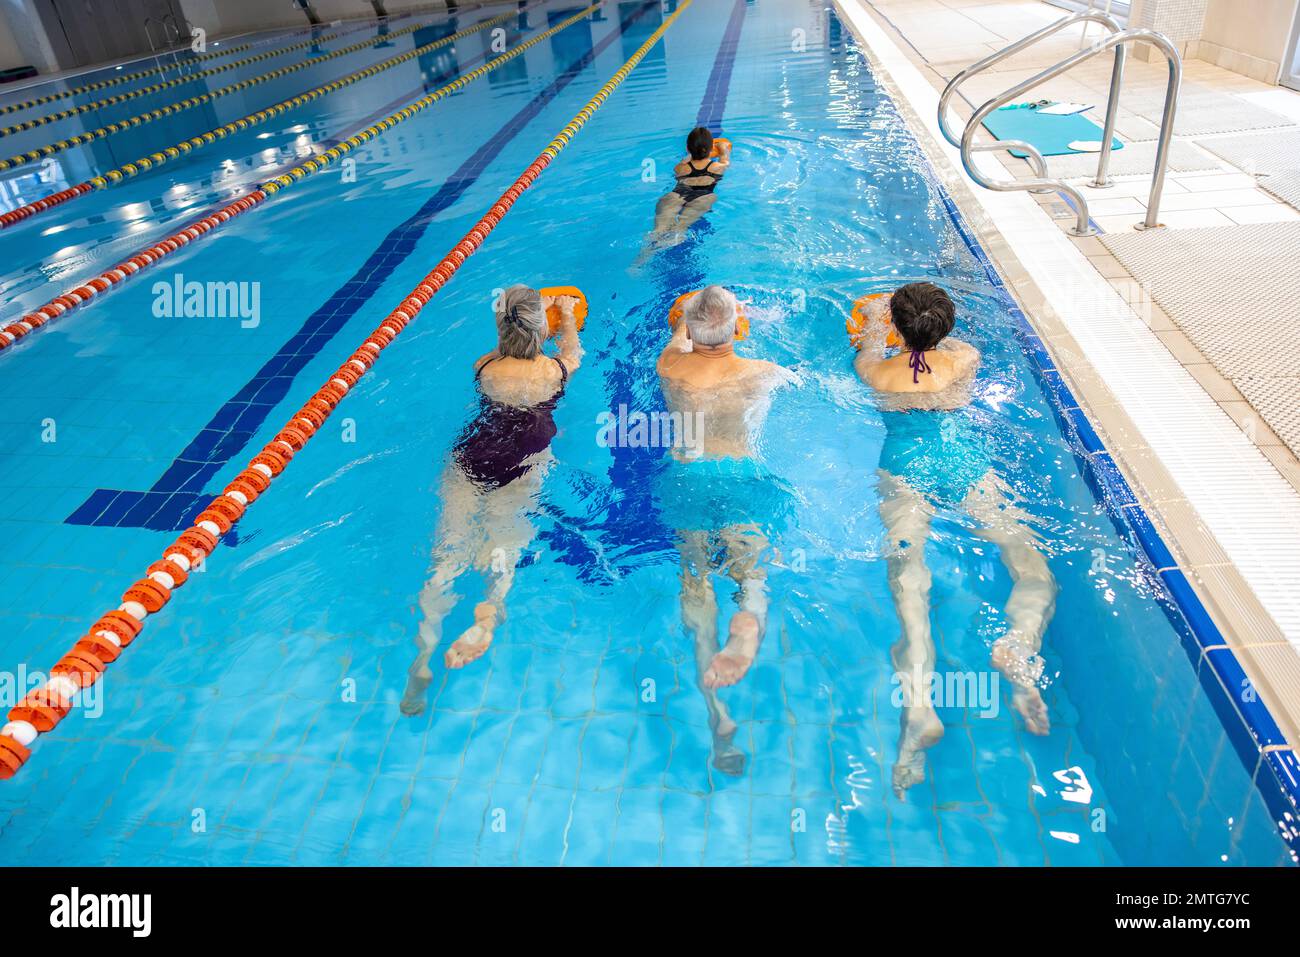 Group of people swimming together in the swimming pool Stock Photo